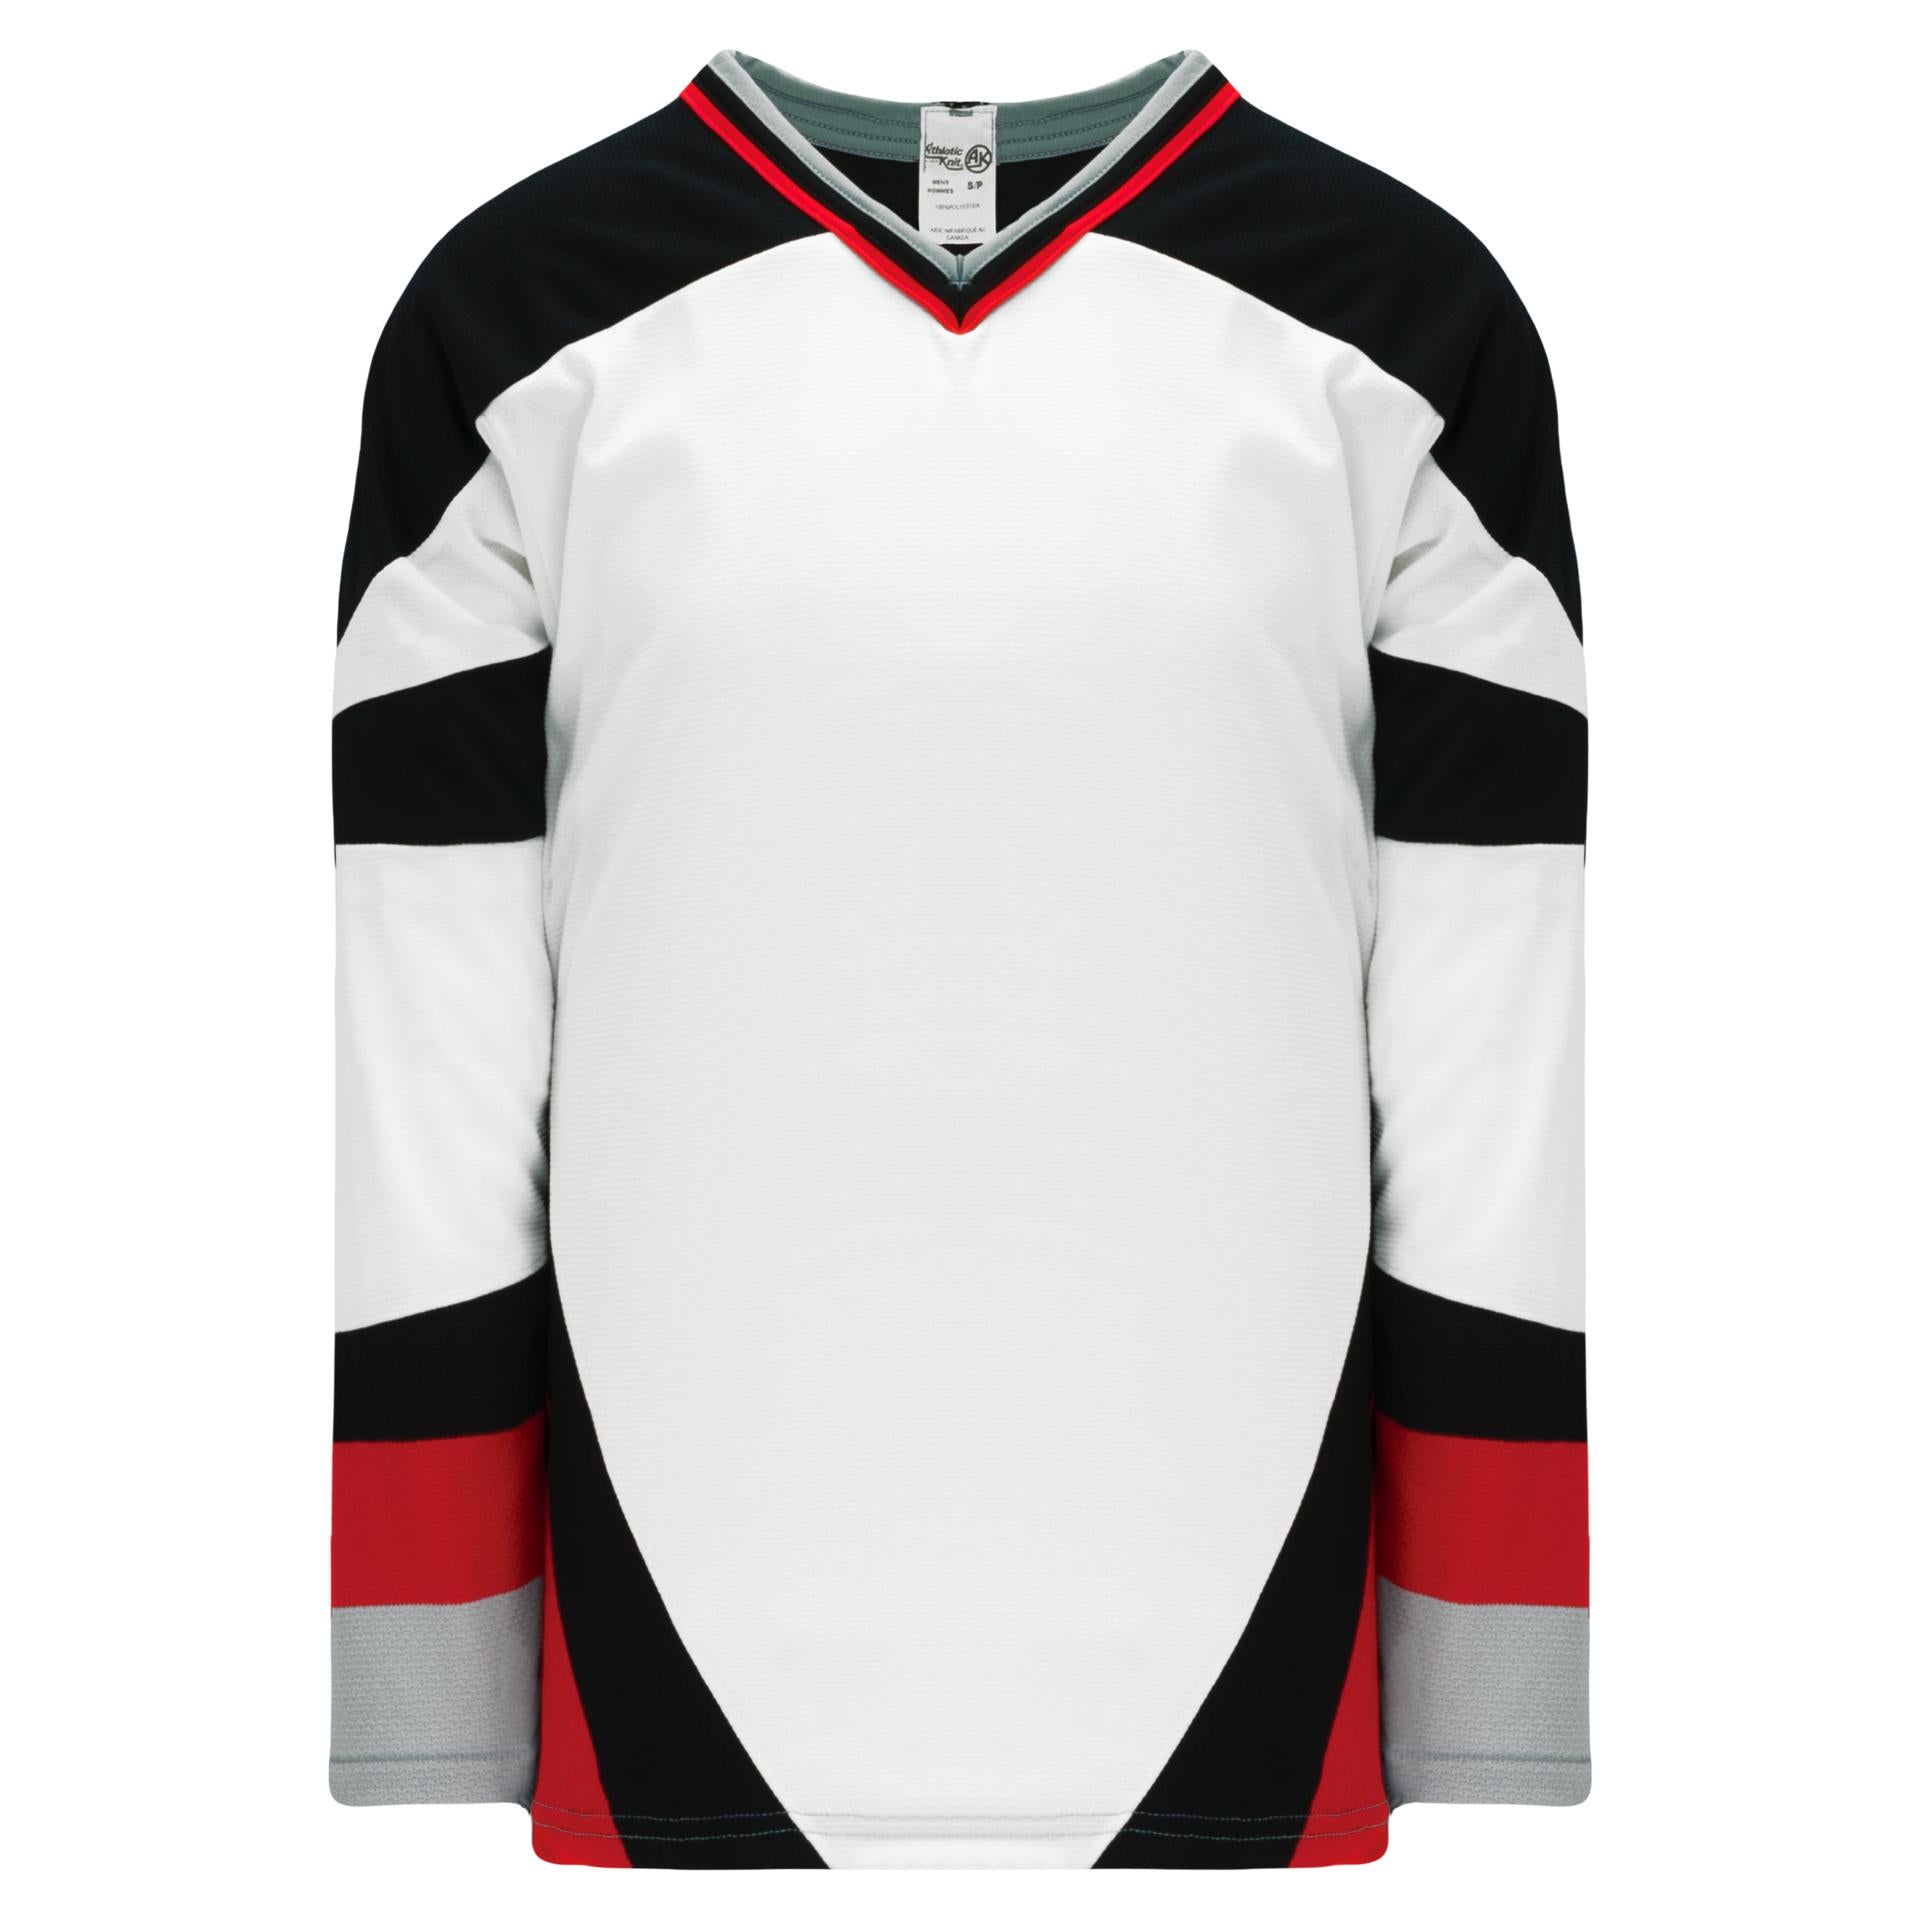  Outerstuff NHL Youth 8-20 White 2019 All Star Premier Team  Blank Jersey (Buffalo Sabers White, 8-12) : Sports & Outdoors